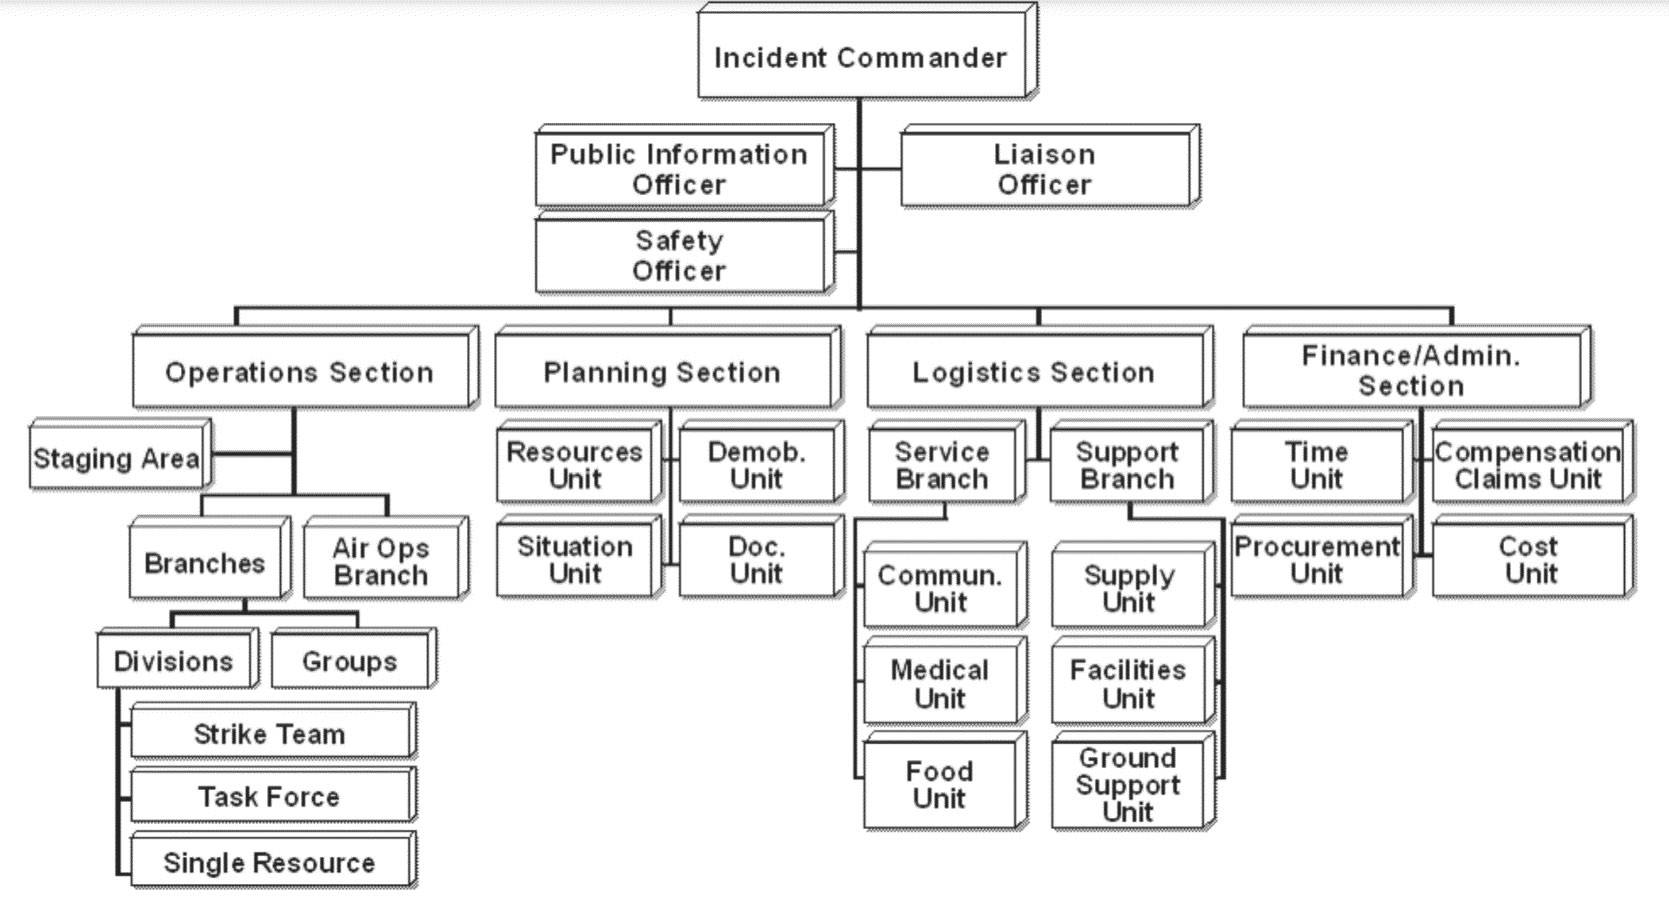 Basic Incident Command System organization chart. The ICS system has been used for many different types of incidents since its inception. (Chart from Federal Emergency Management Agency)